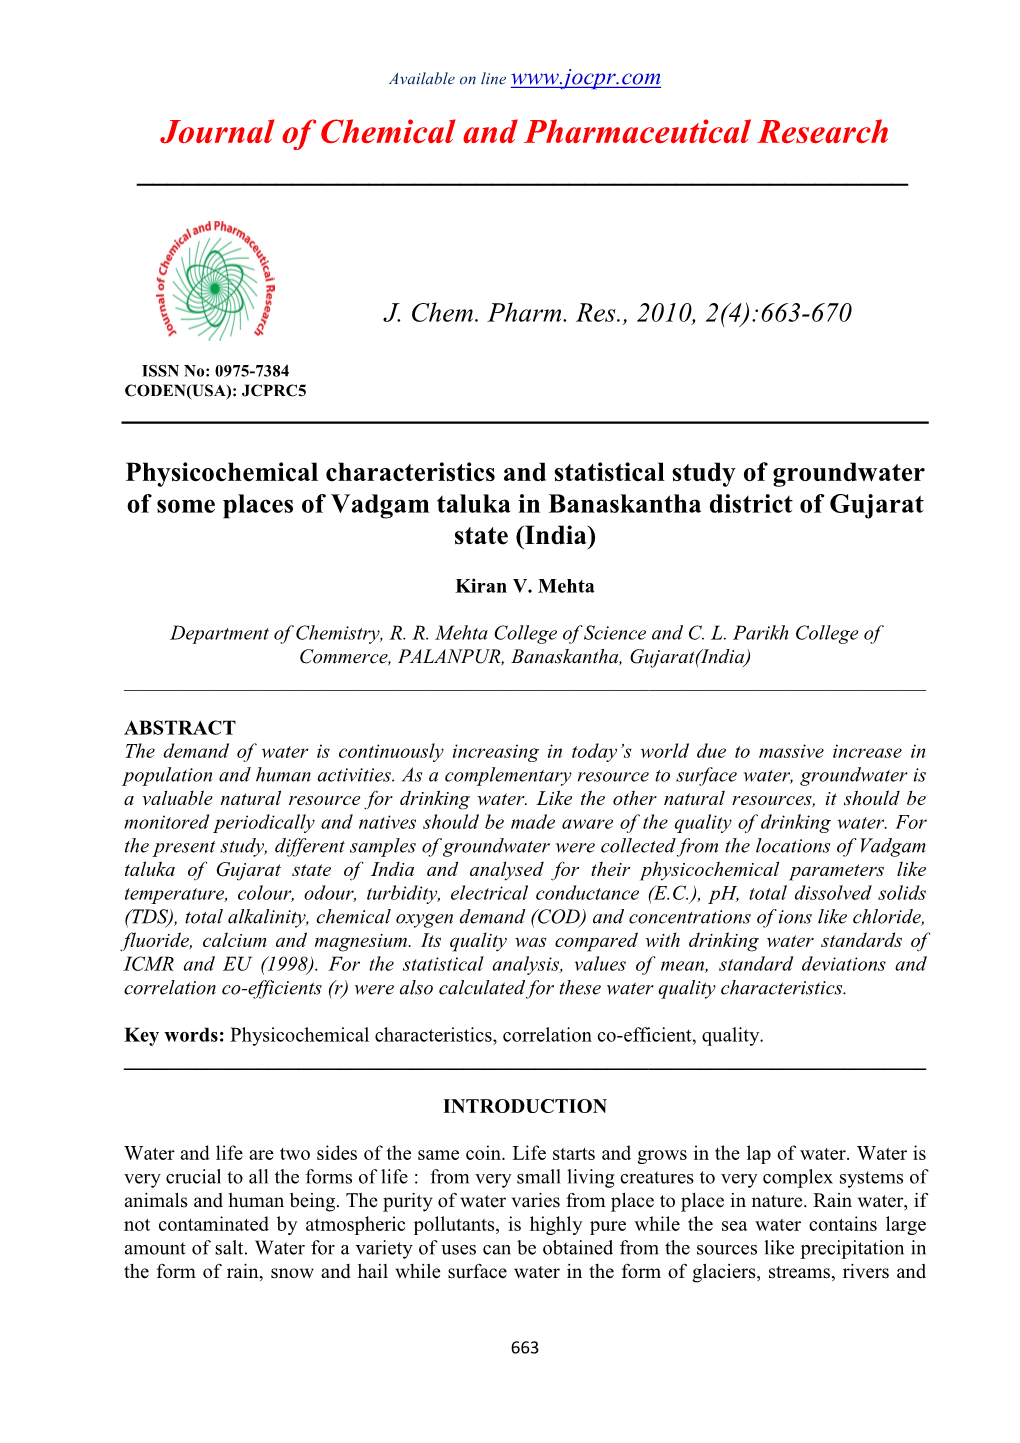 Physicochemical Characteristics and Statistical Study of Groundwater of Some Places of Vadgam Taluka in Banaskantha District of Gujarat State (India)